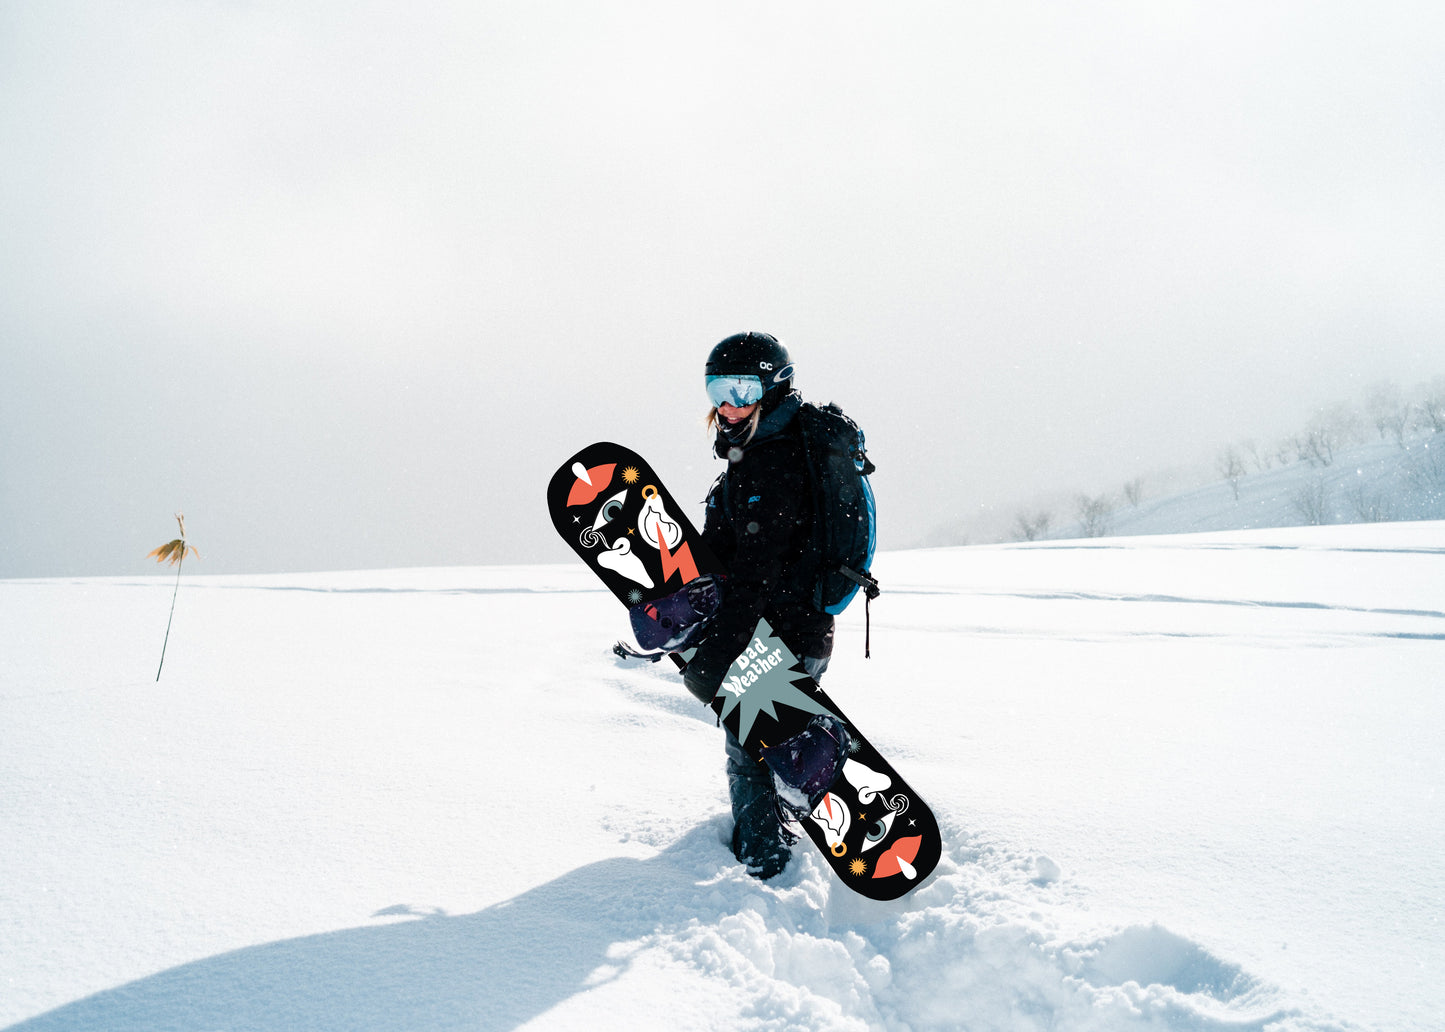 NBW Limited Snowboard